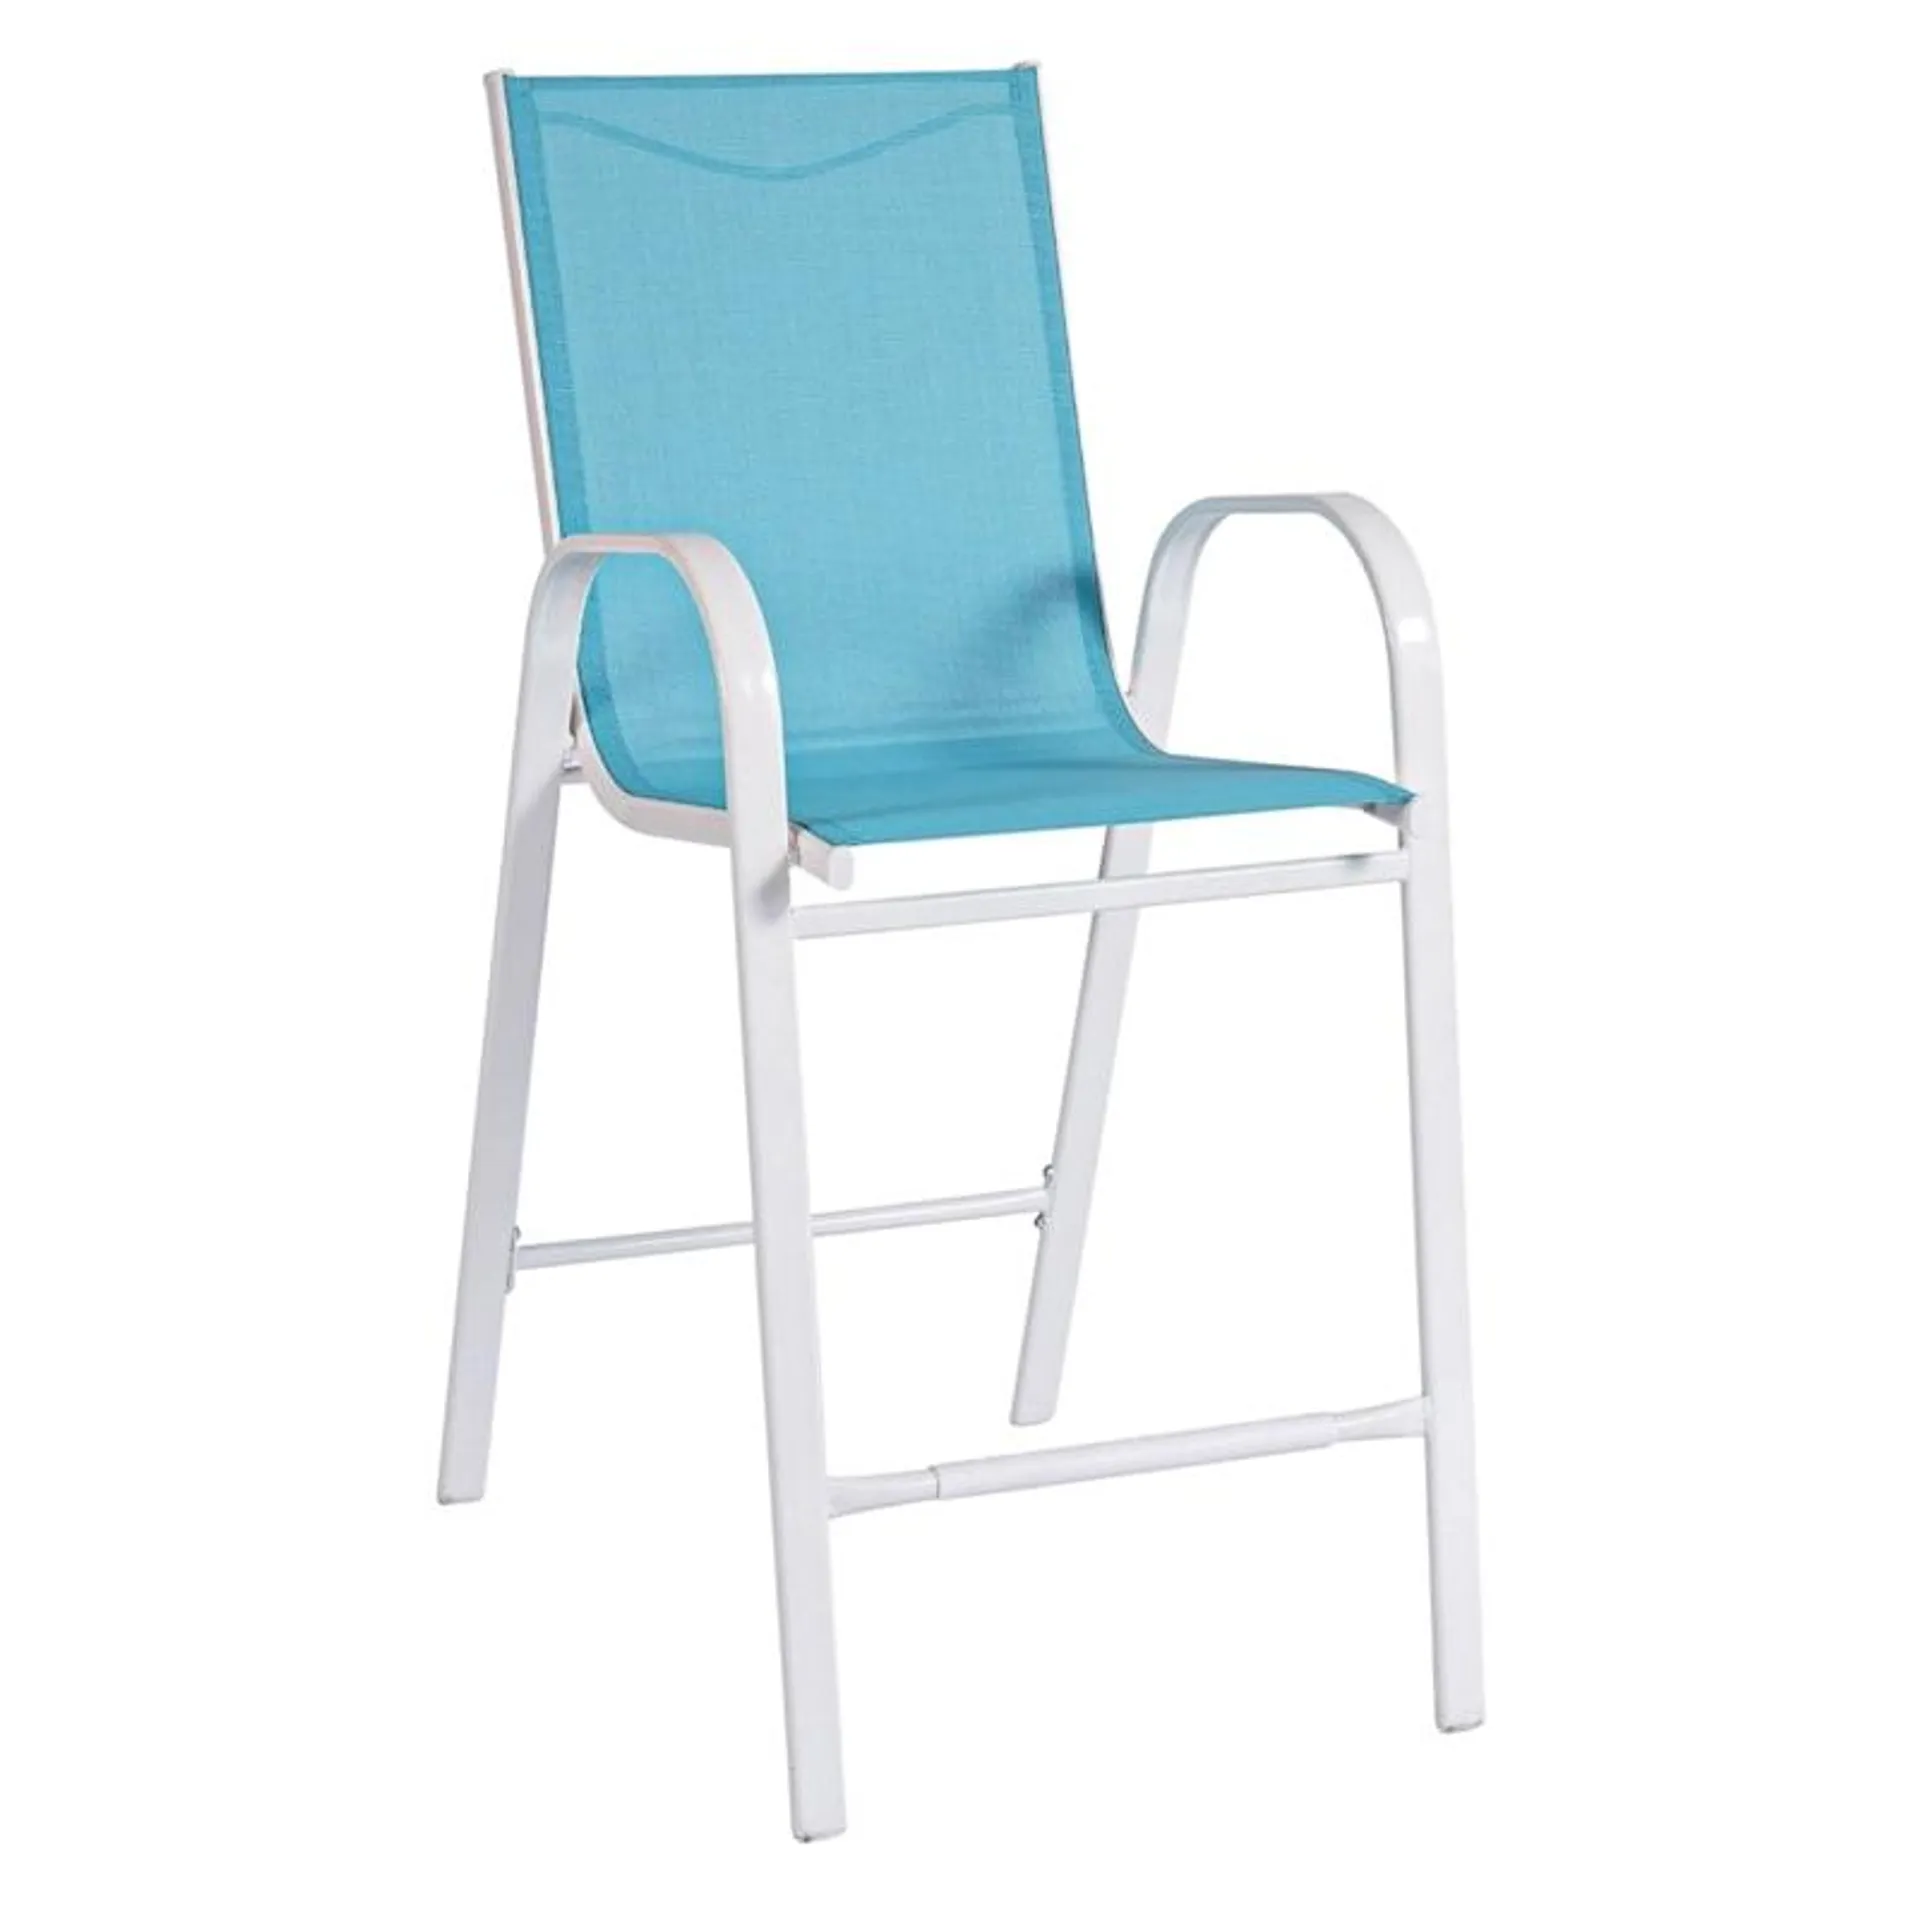 Stackable Aquarelle Blue Sling Patio Barstool with White Frame